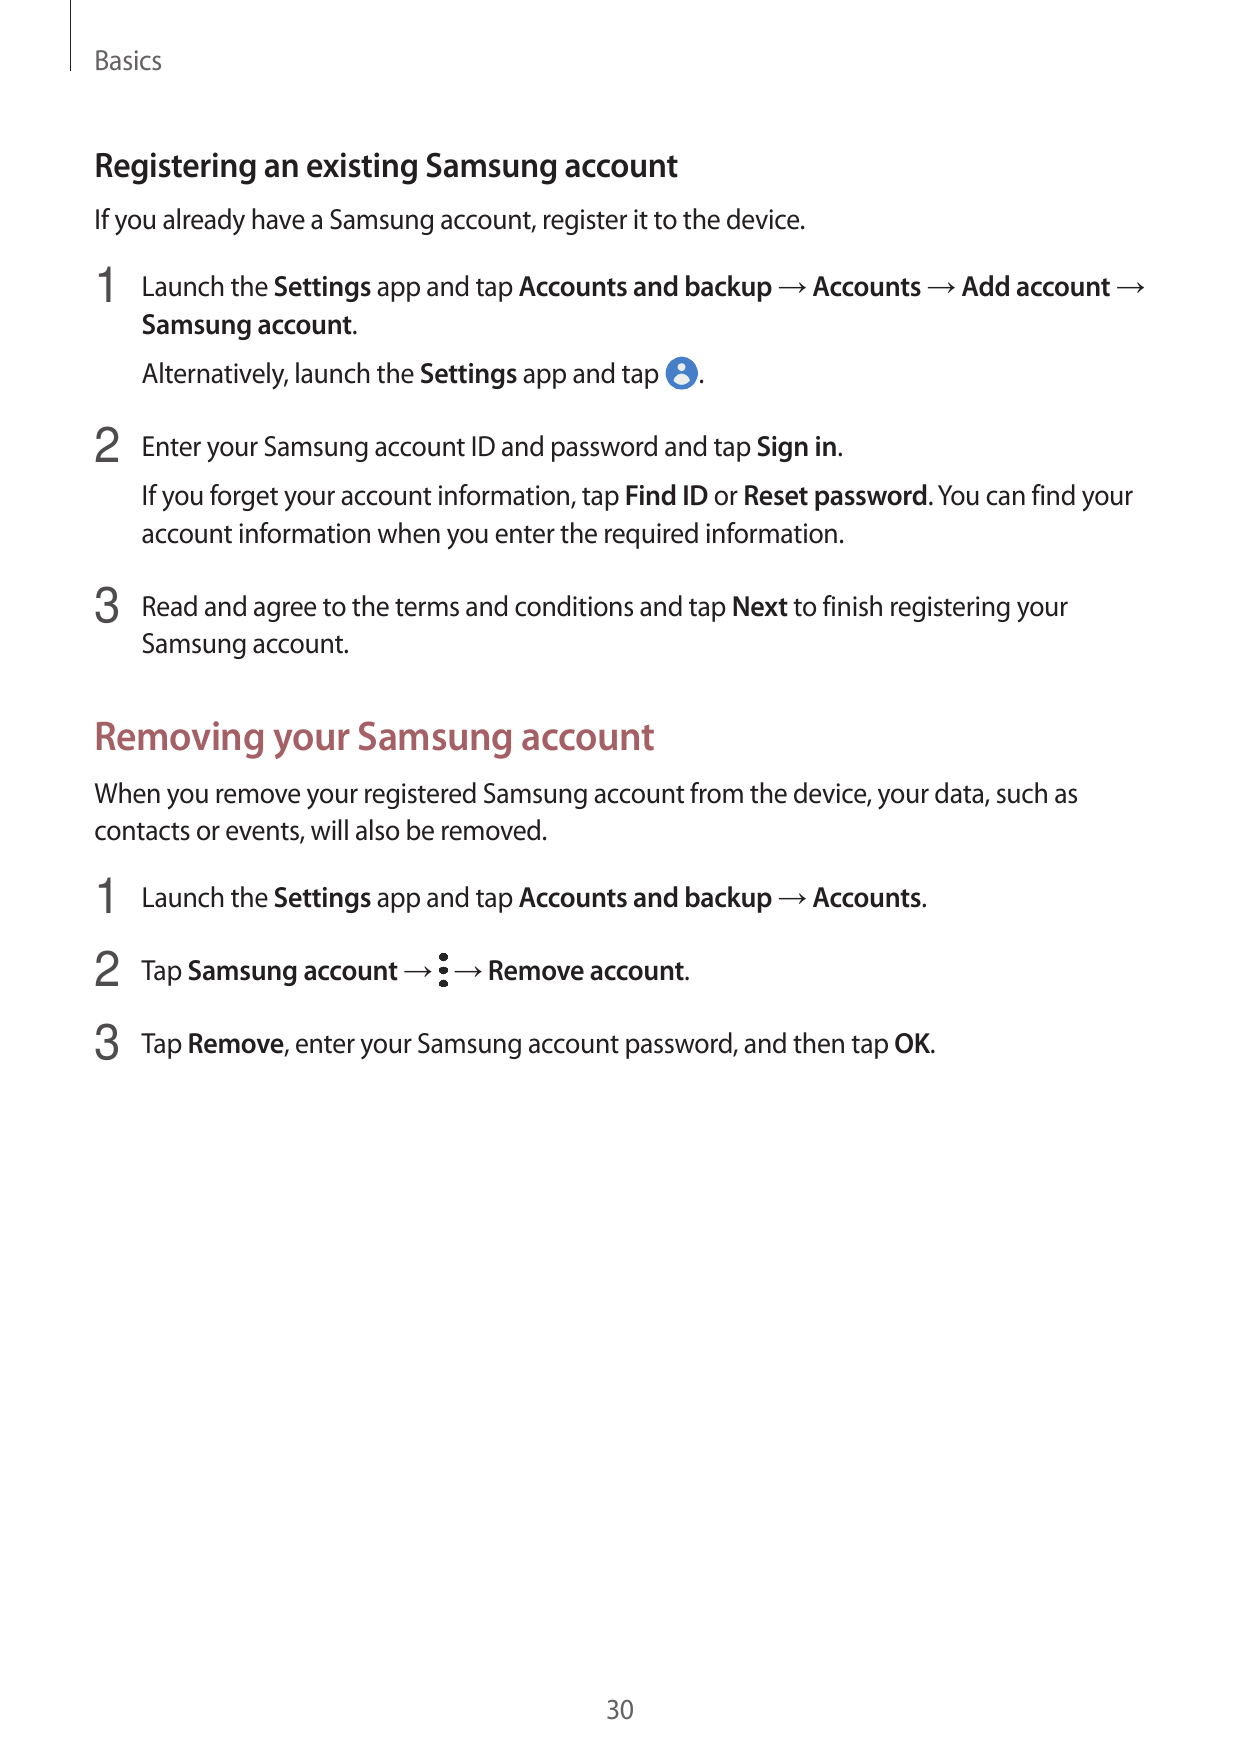 BasicsRegistering an existing Samsung accountIf you already have a Samsung account, register it to the device.1 Launch the Setti